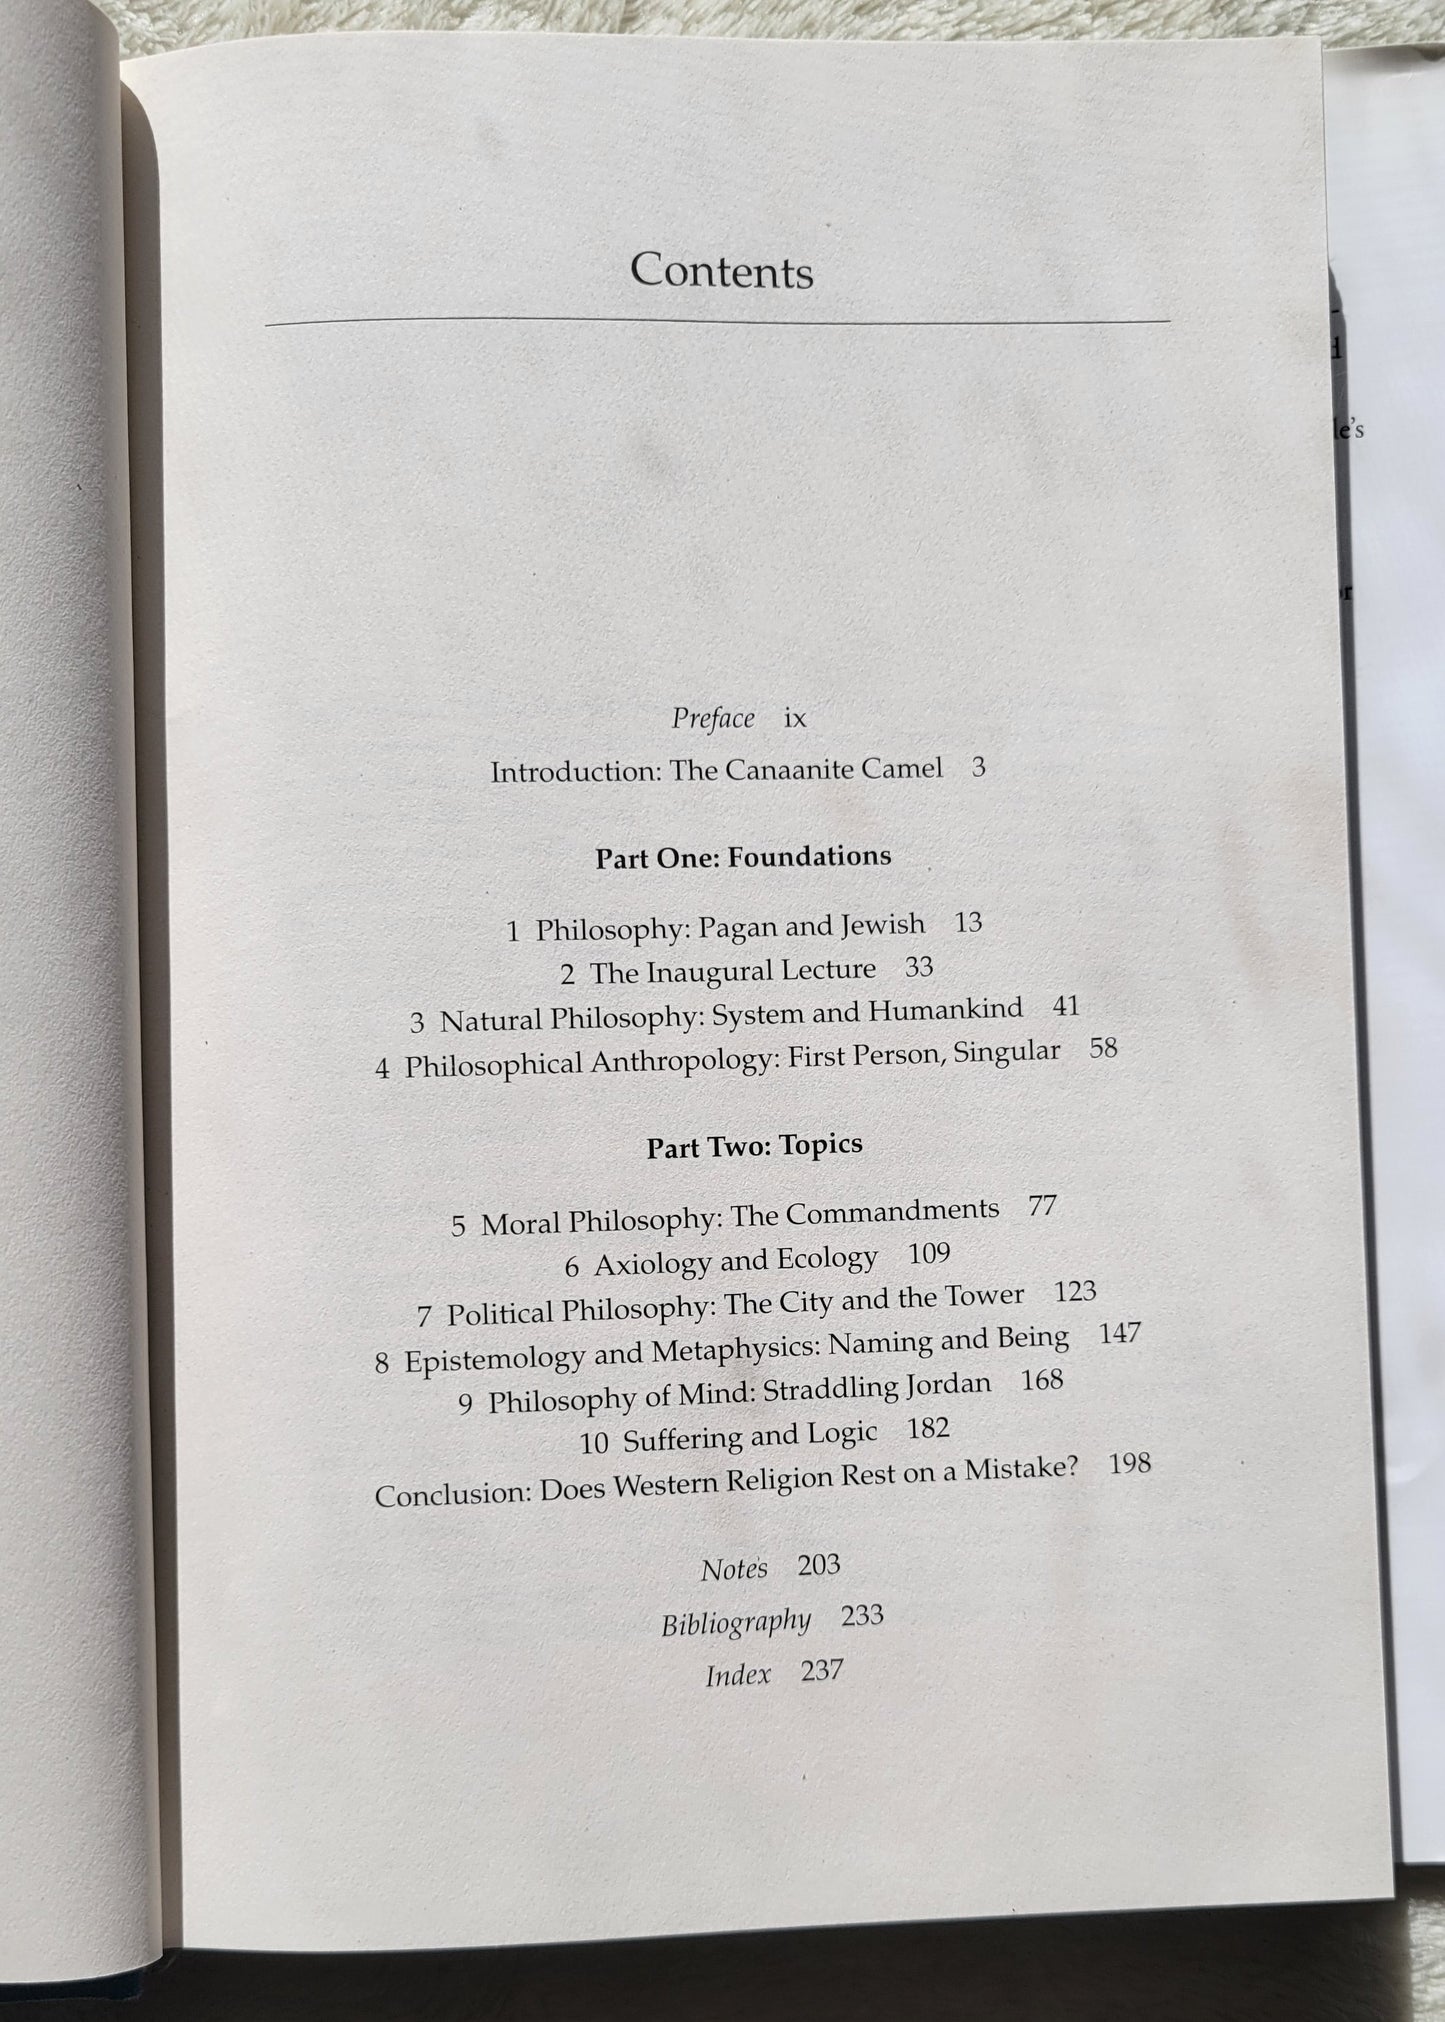 Used book for sale "I Am: Monotheism and the Philosophy of the Bible" by Mark Glouberman, University of Toronto Press, 2019. View of table of contents.